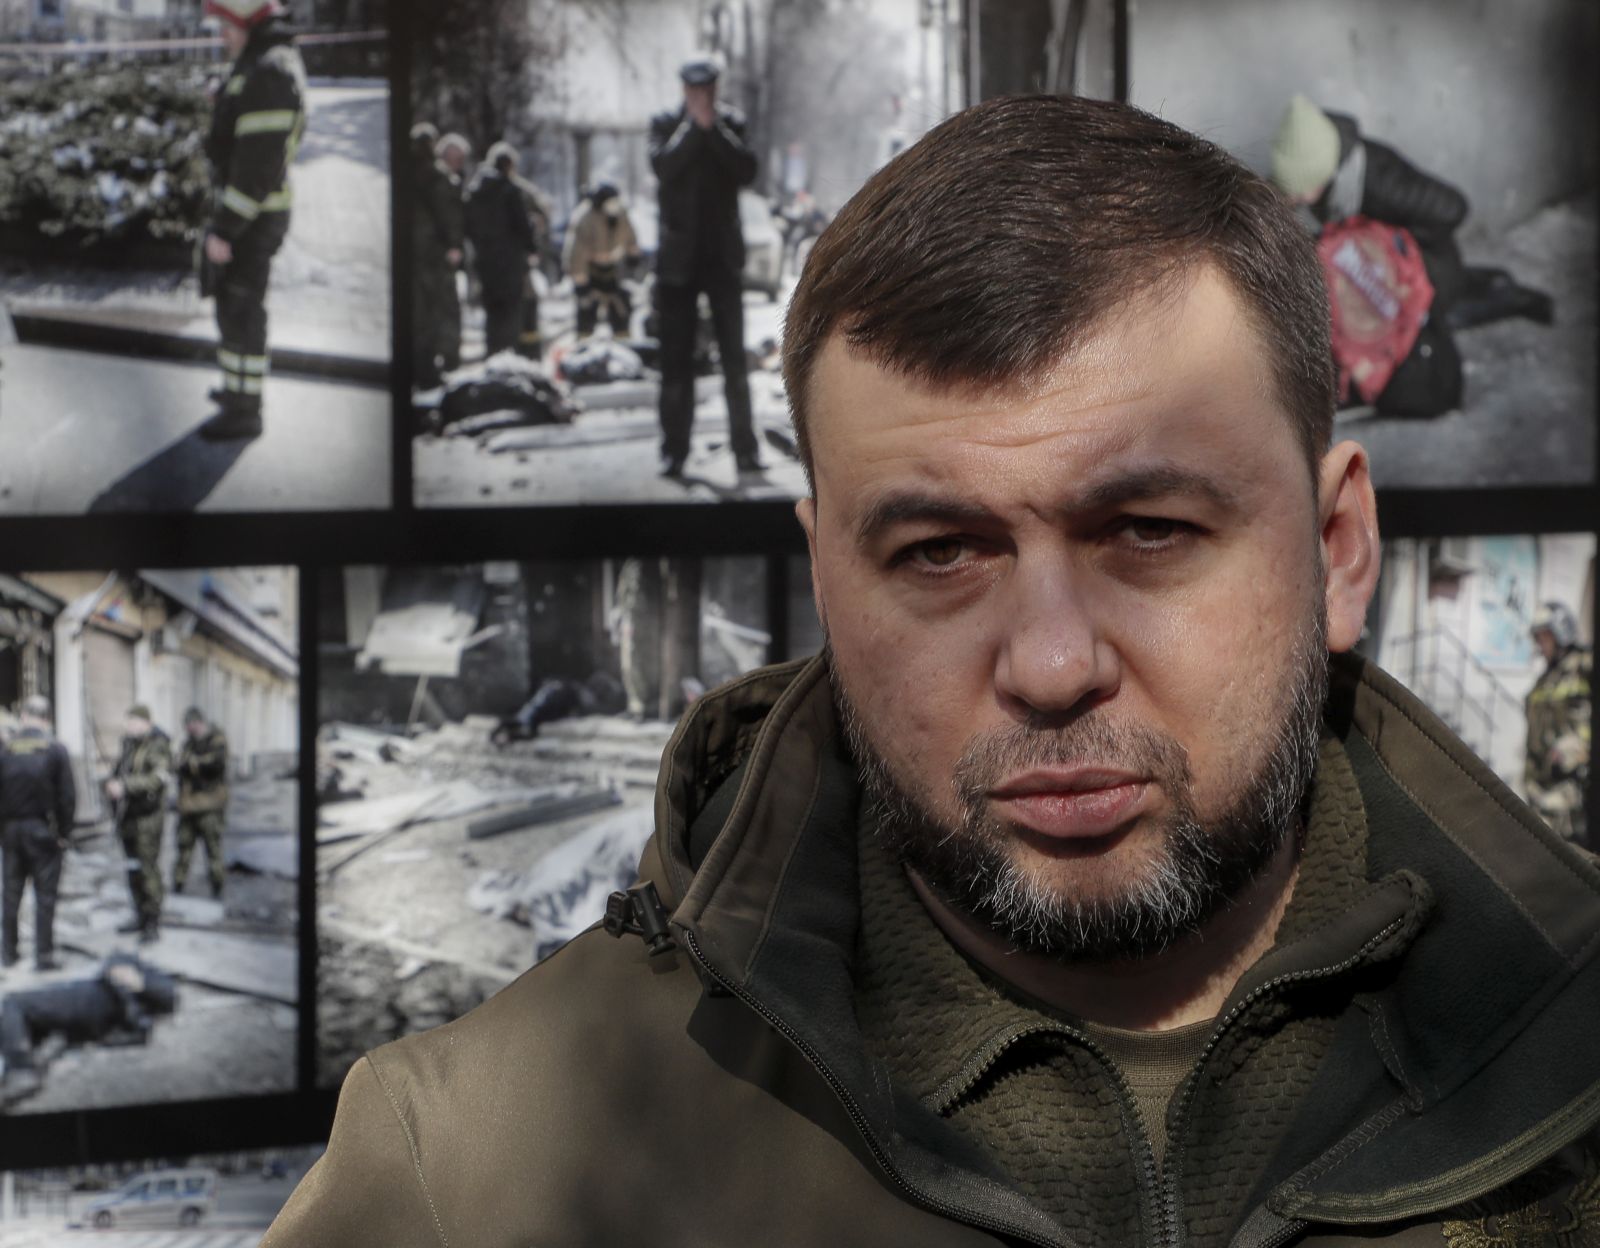 epa09852016 Head of the Donetsk People's Republic Denis Pushilin speaks with journalists at the place where people were killed in downtown of Donetsk, Ukraine, 26 March 2022. On 14 March over the building of the Government House in the center of Donetsk, air defense forces intercepted a missile of the tactical missile system 'Tochka-U' as a result of this, 21 people, including children, were killed and 36 were injured. On 24 February Russian troops had entered Ukrainian territory in what the Russian president declared a 'special military operation', resulting in fighting and destruction in the country, a huge flow of refugees, and multiple sanctions against Russia.  EPA/SERGEI ILNITSKY